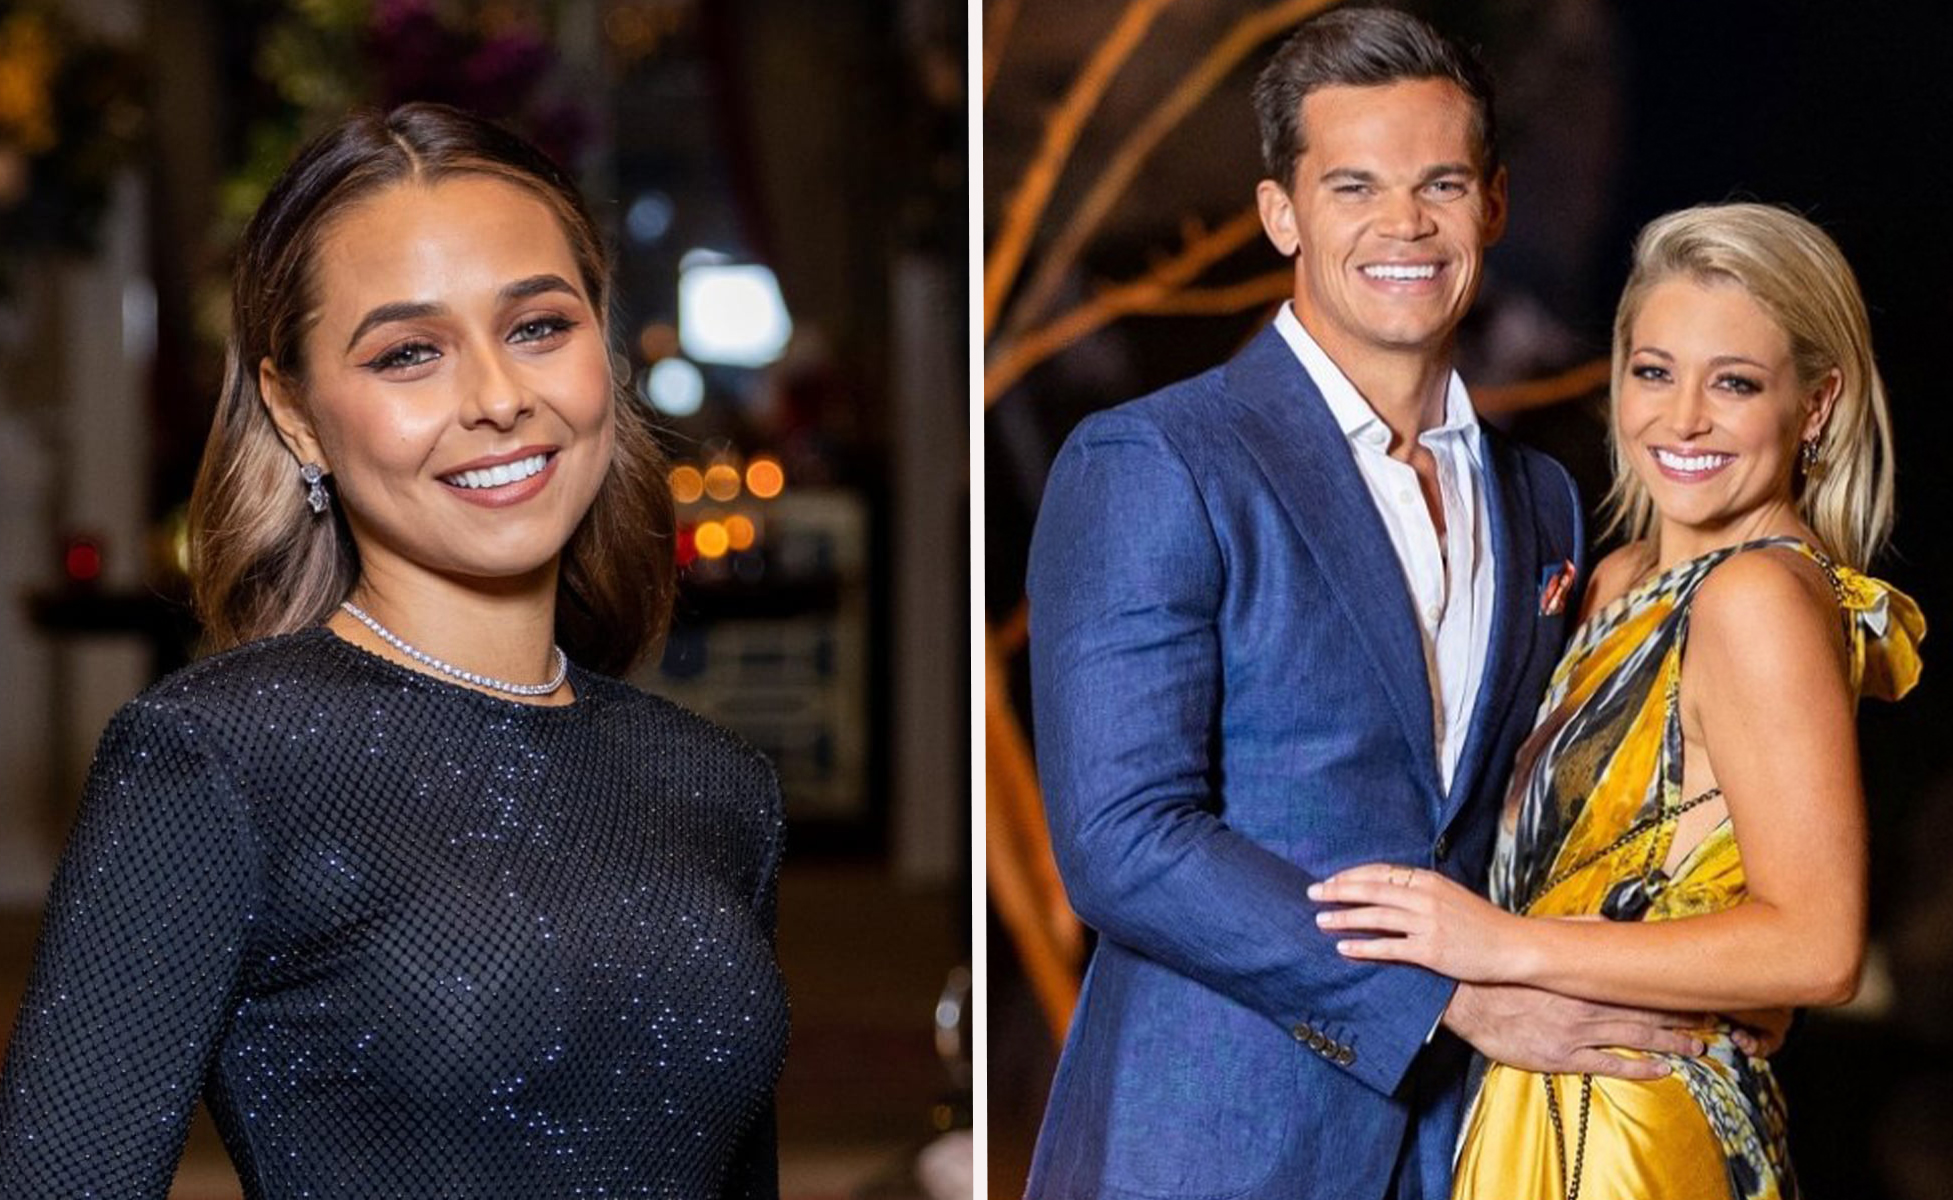 “Can we get it back to its glory days?” Channel 10 executives try to salvage The Bachelor franchise after a year of dismal ratings